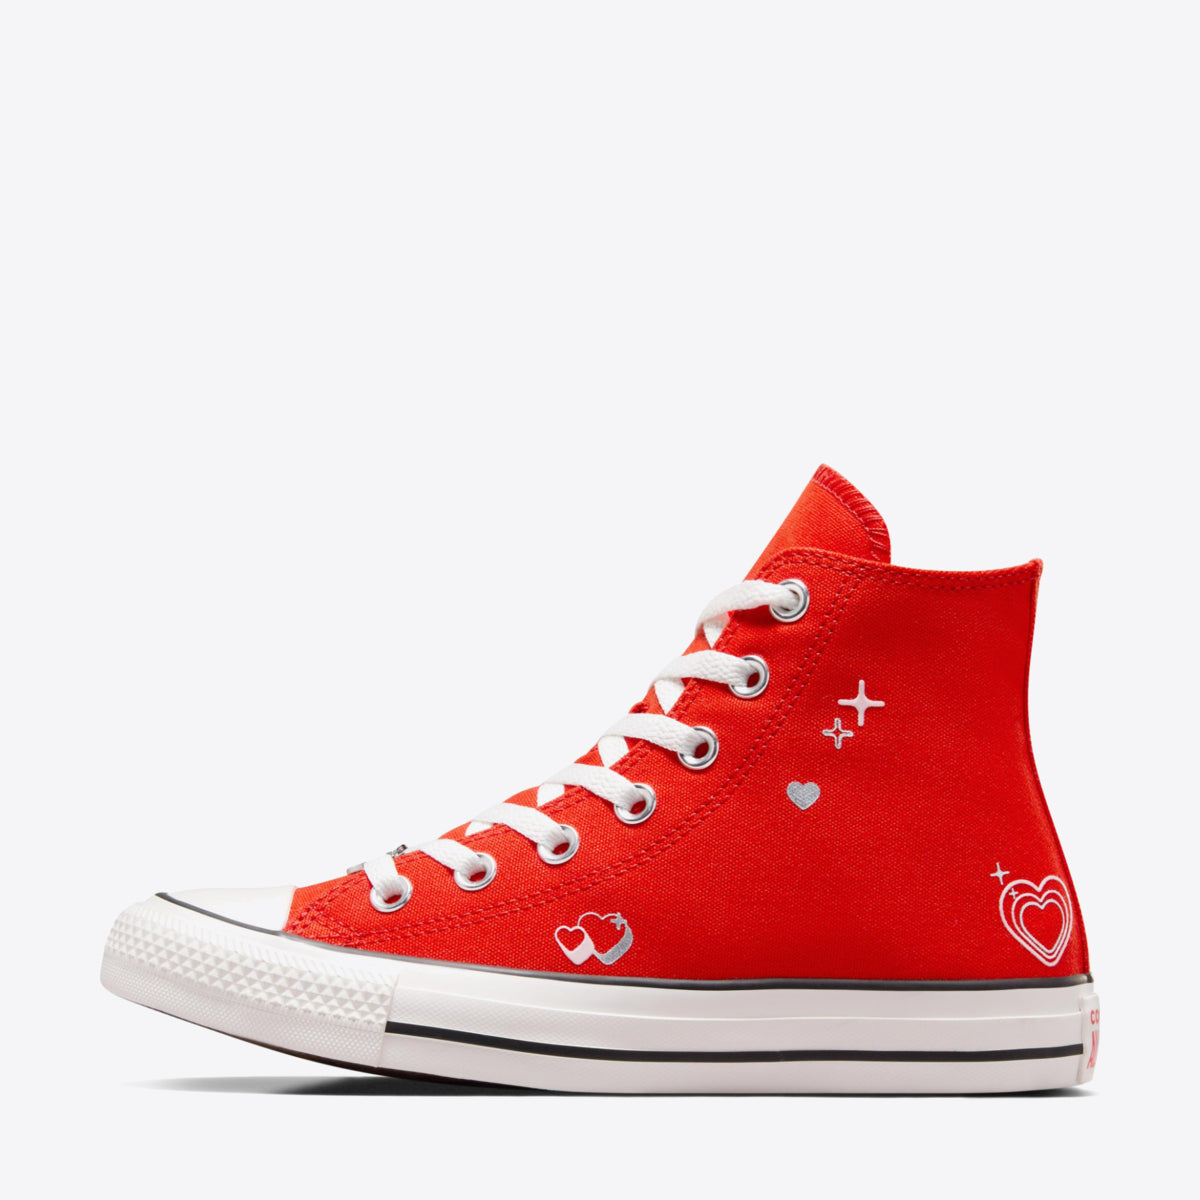 CONVERSE Chuck Taylor All Star BEMY2K High Fever Dream/Vintage White - Image 4